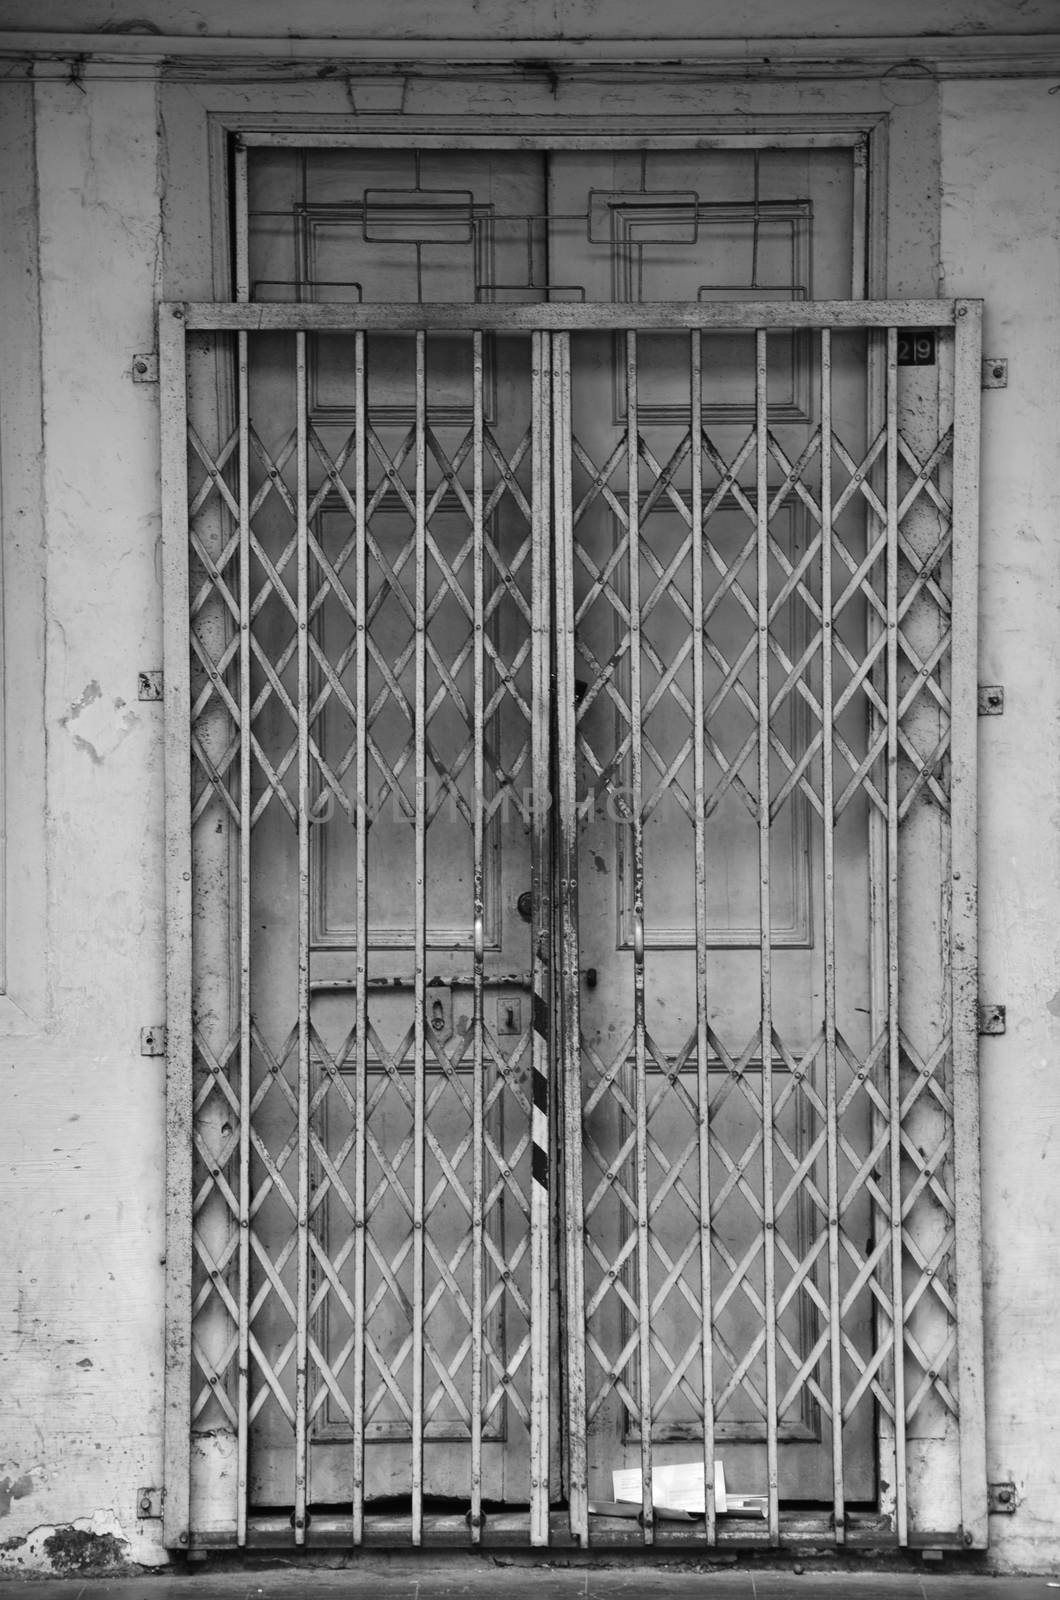 The pattern of Steel stretch door in Little India, Singapore.